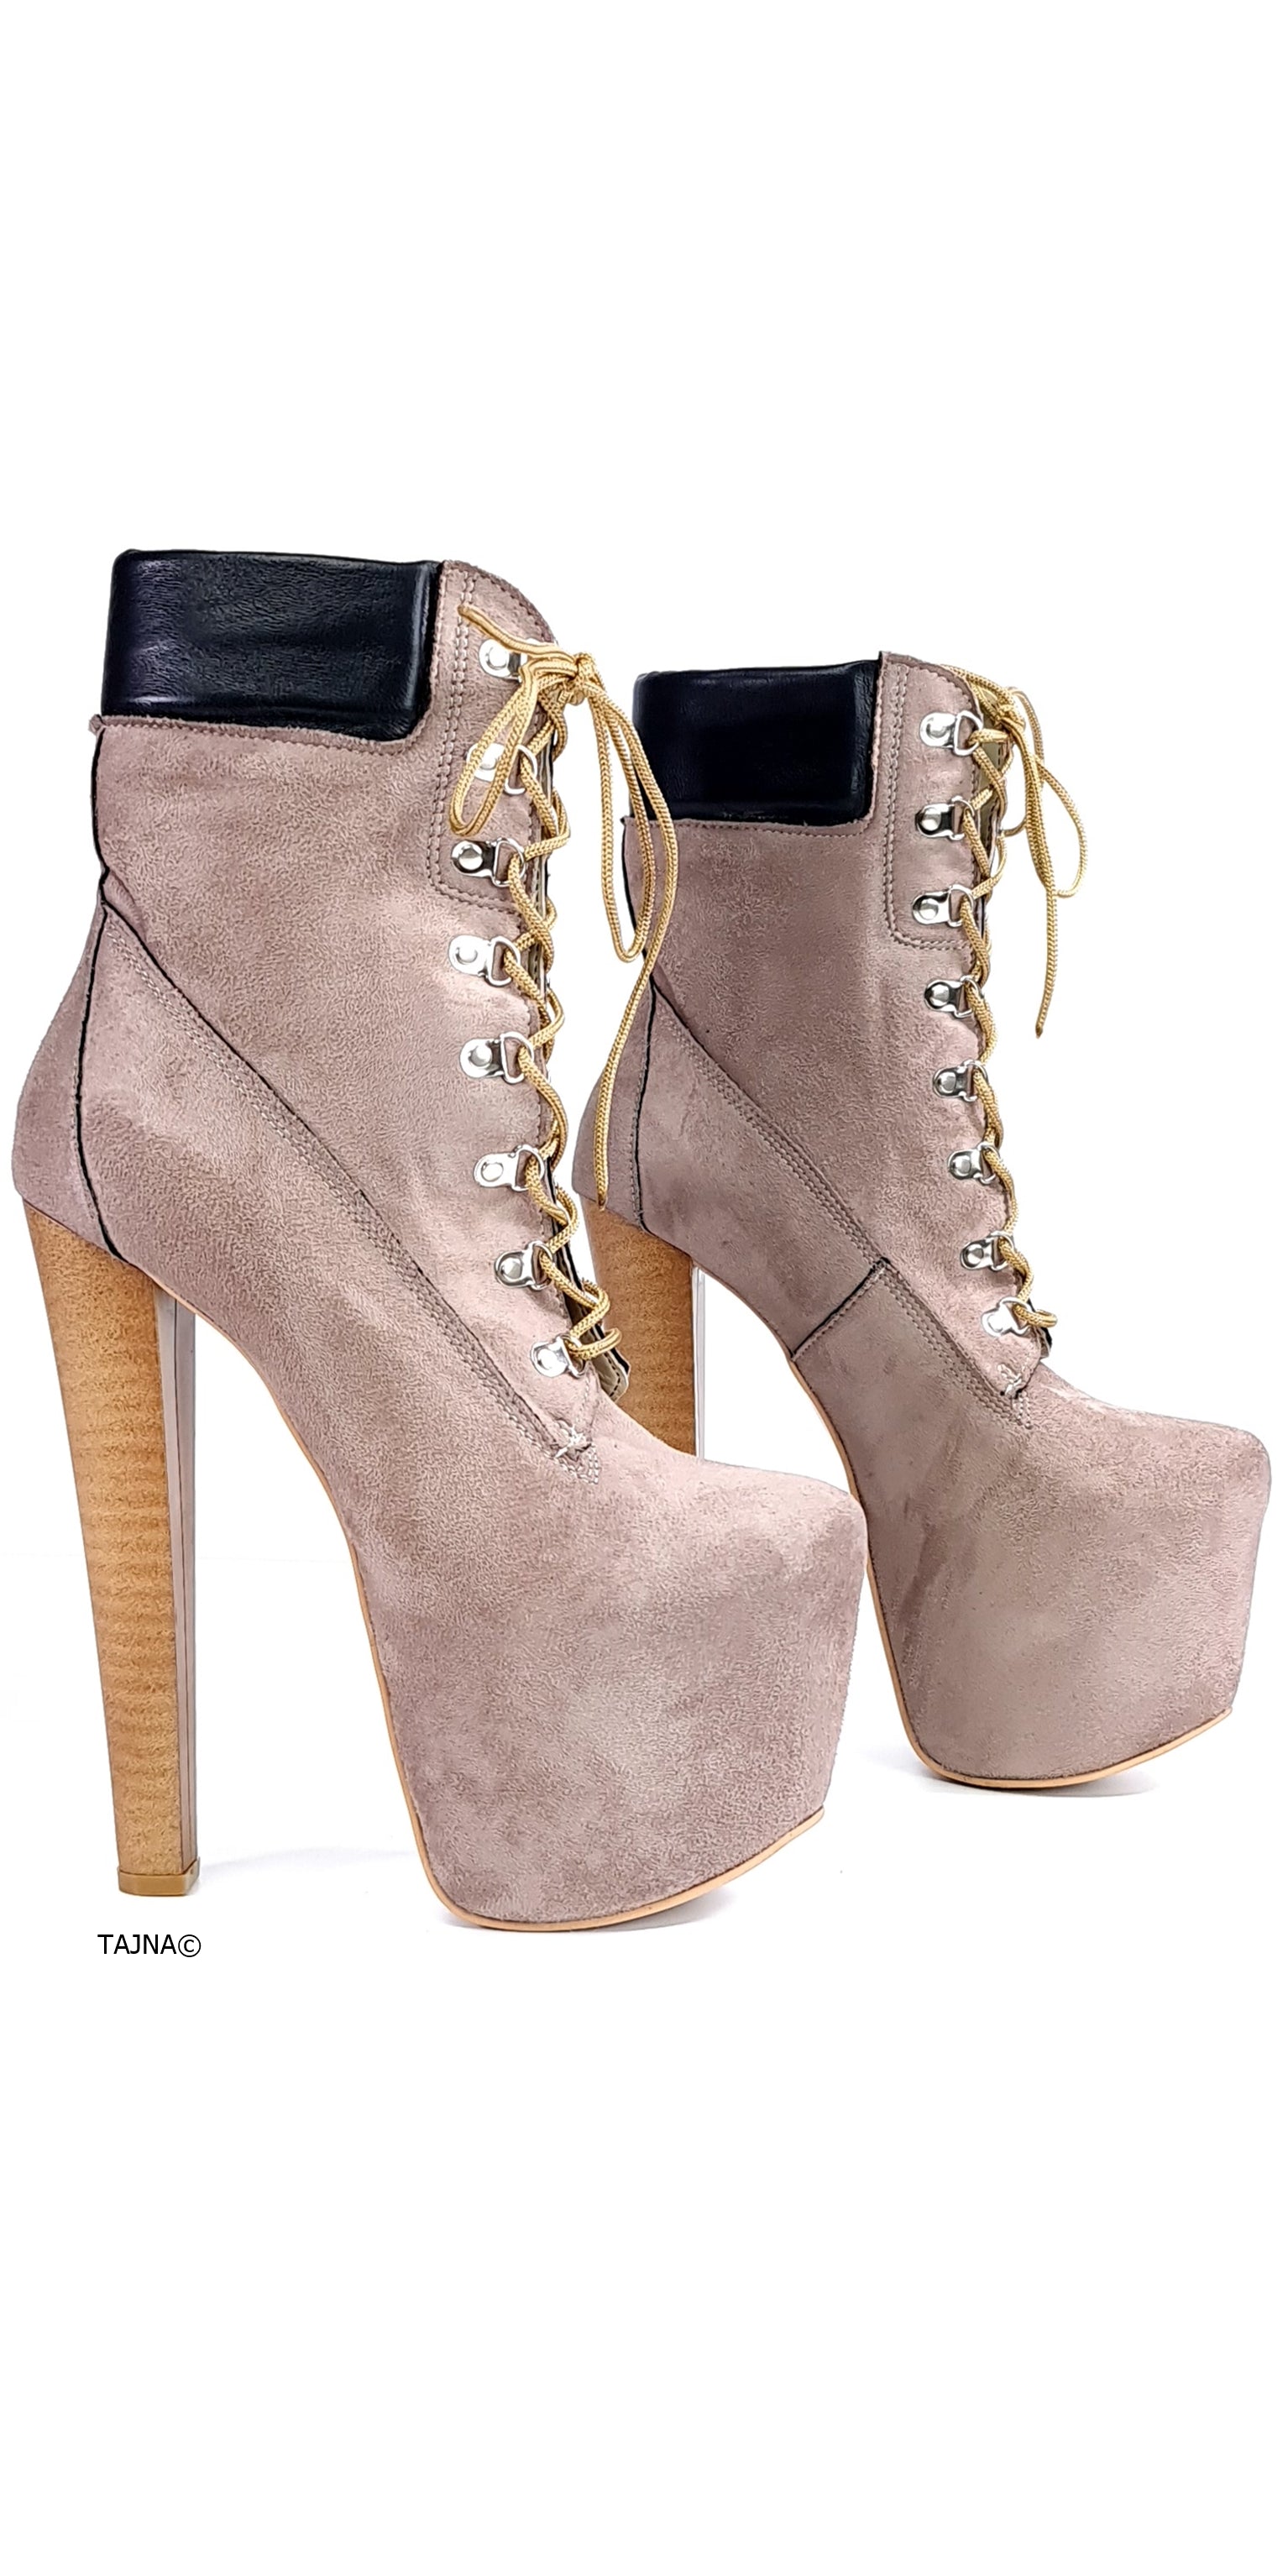 Timber Beige Suede Lace Up High Heel Boots